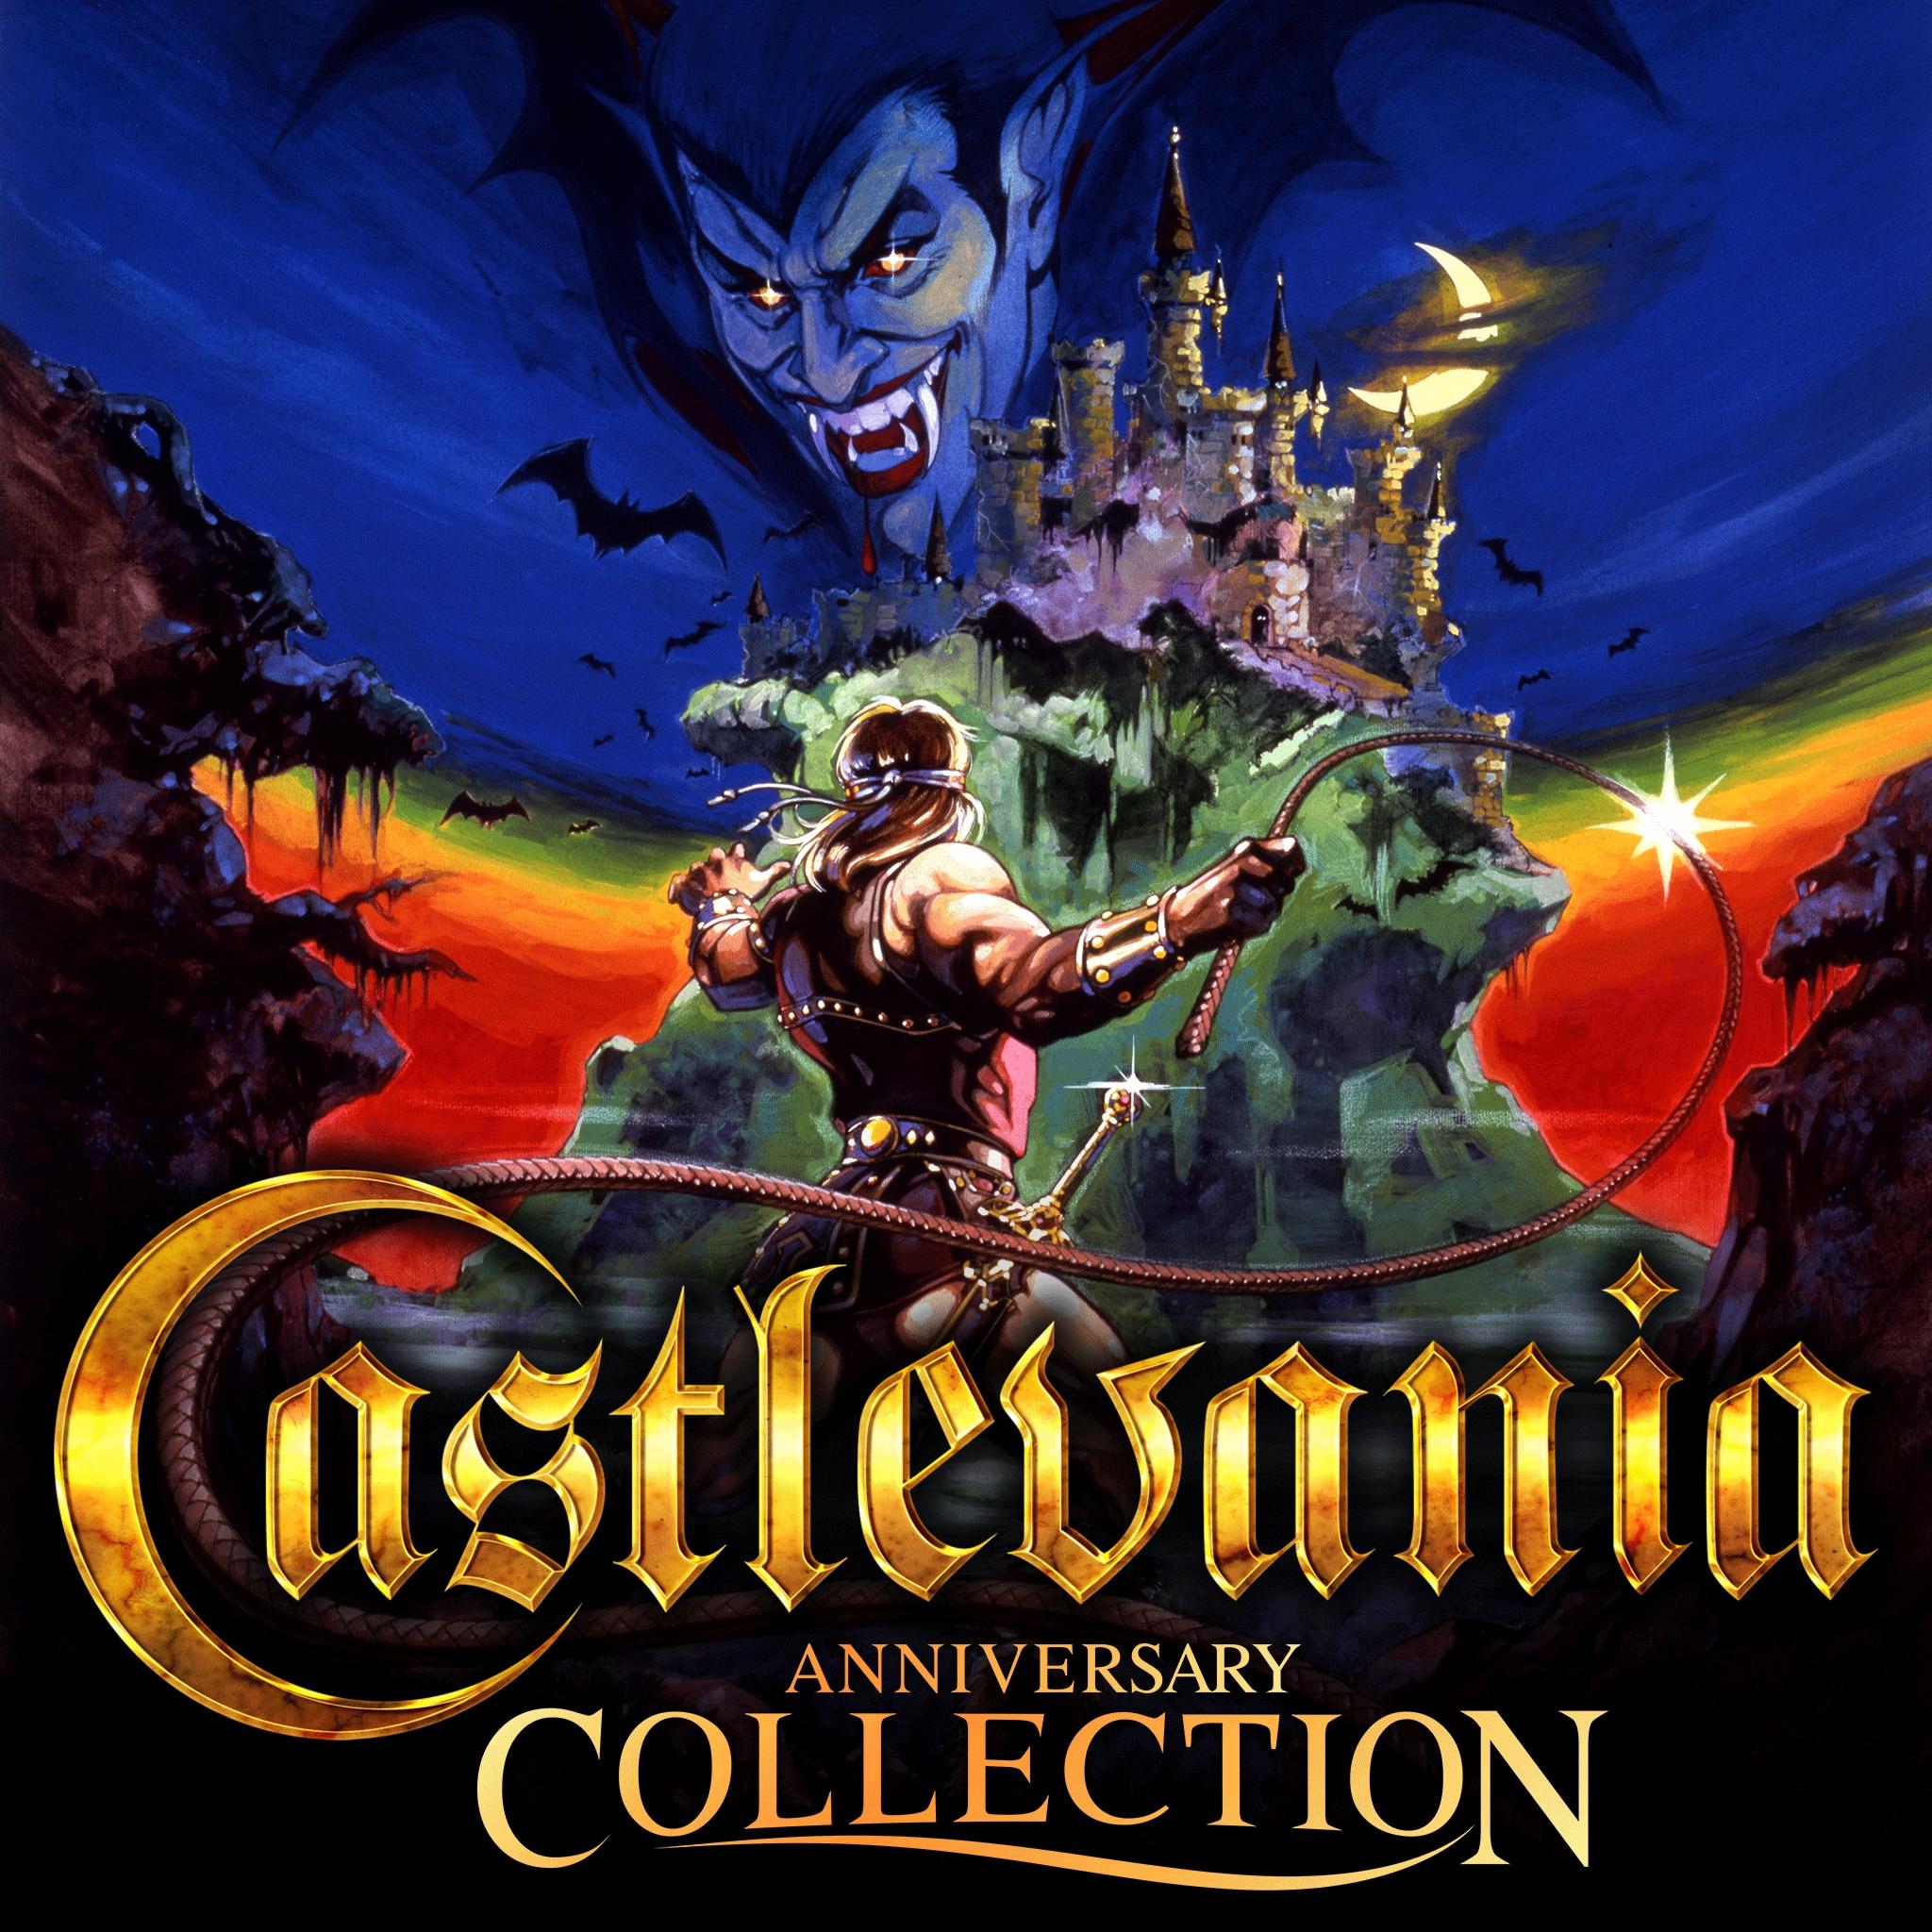 Castlevania Anniversary Collection PC Download for $3.41